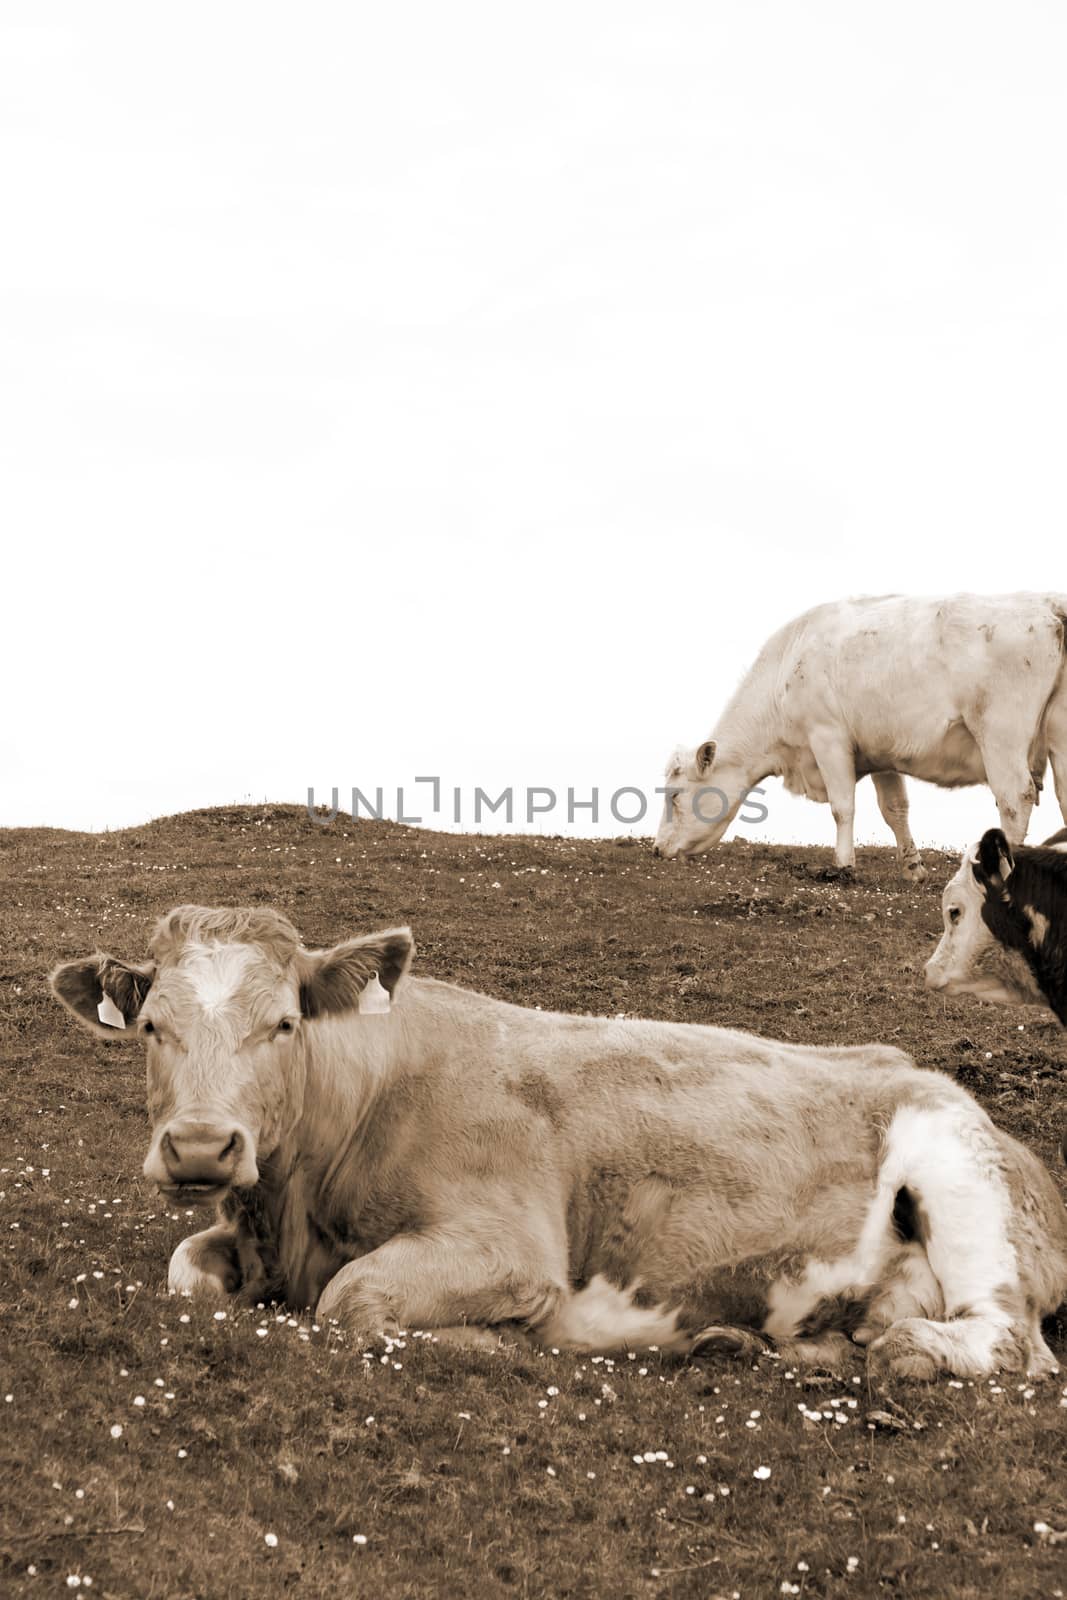 cattle feeding on the green grass of county Kerry Ireland on the wild atlantic way in sepia